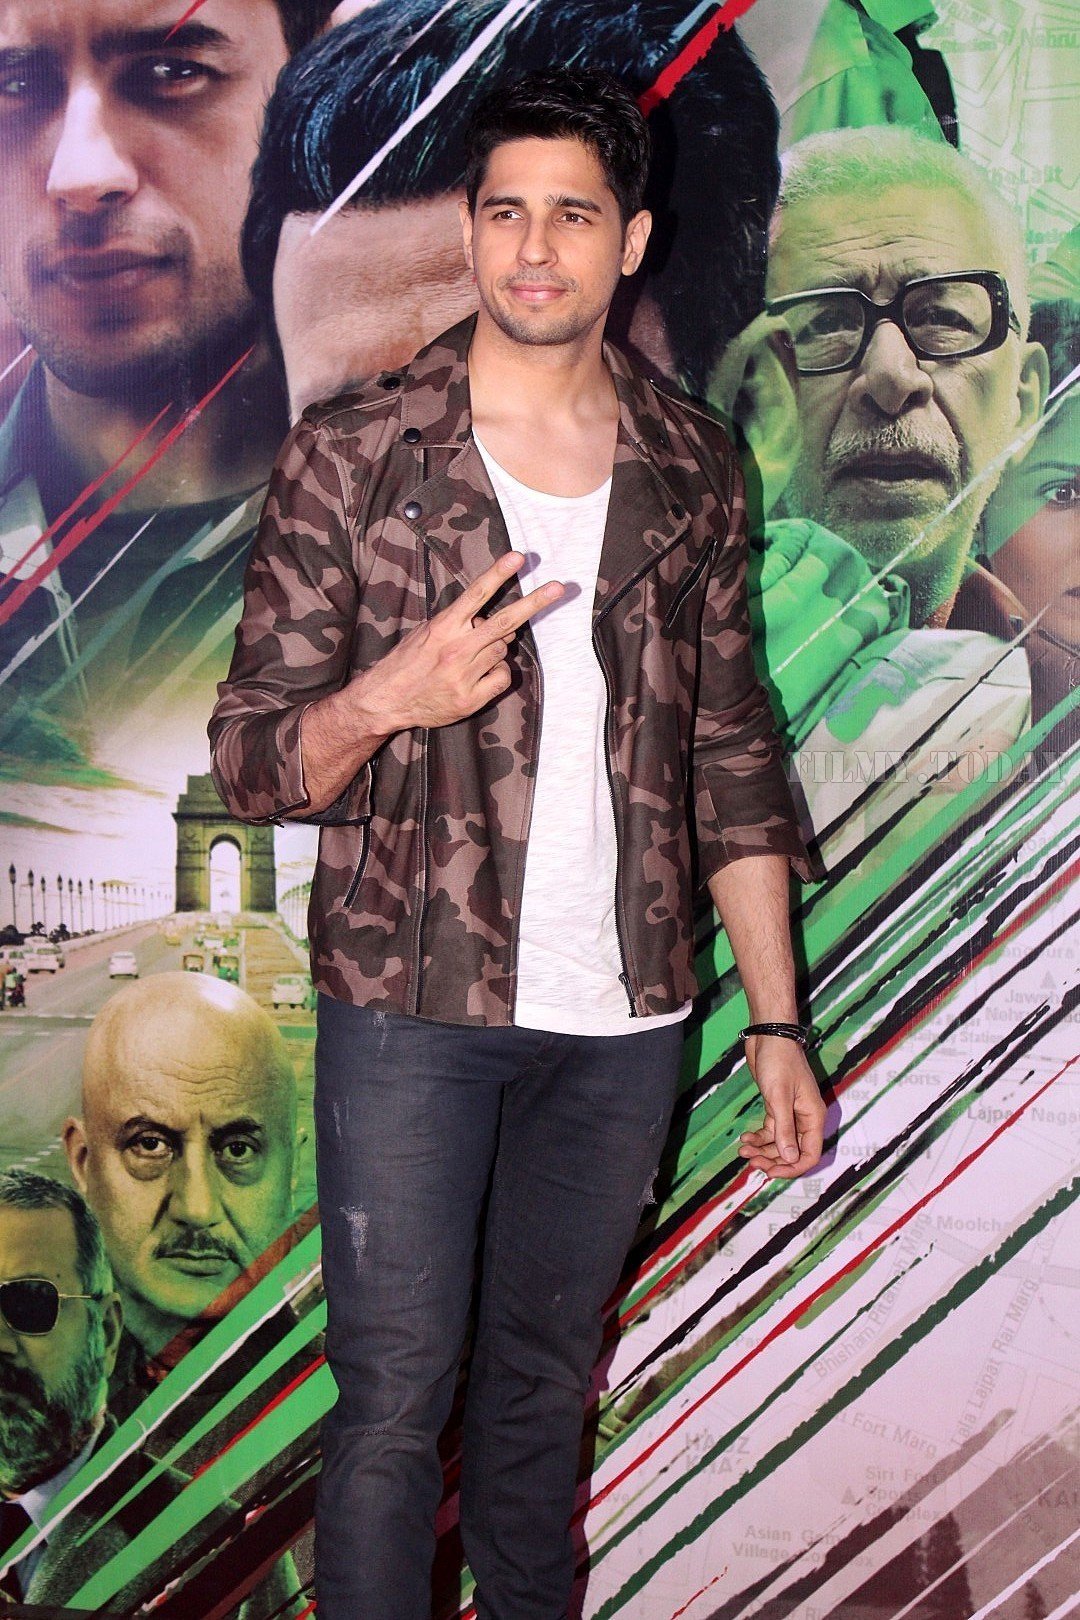 Sidharth Malhotra - Photos: Trailer Launch Of Film Aiyaary | Picture 1552616